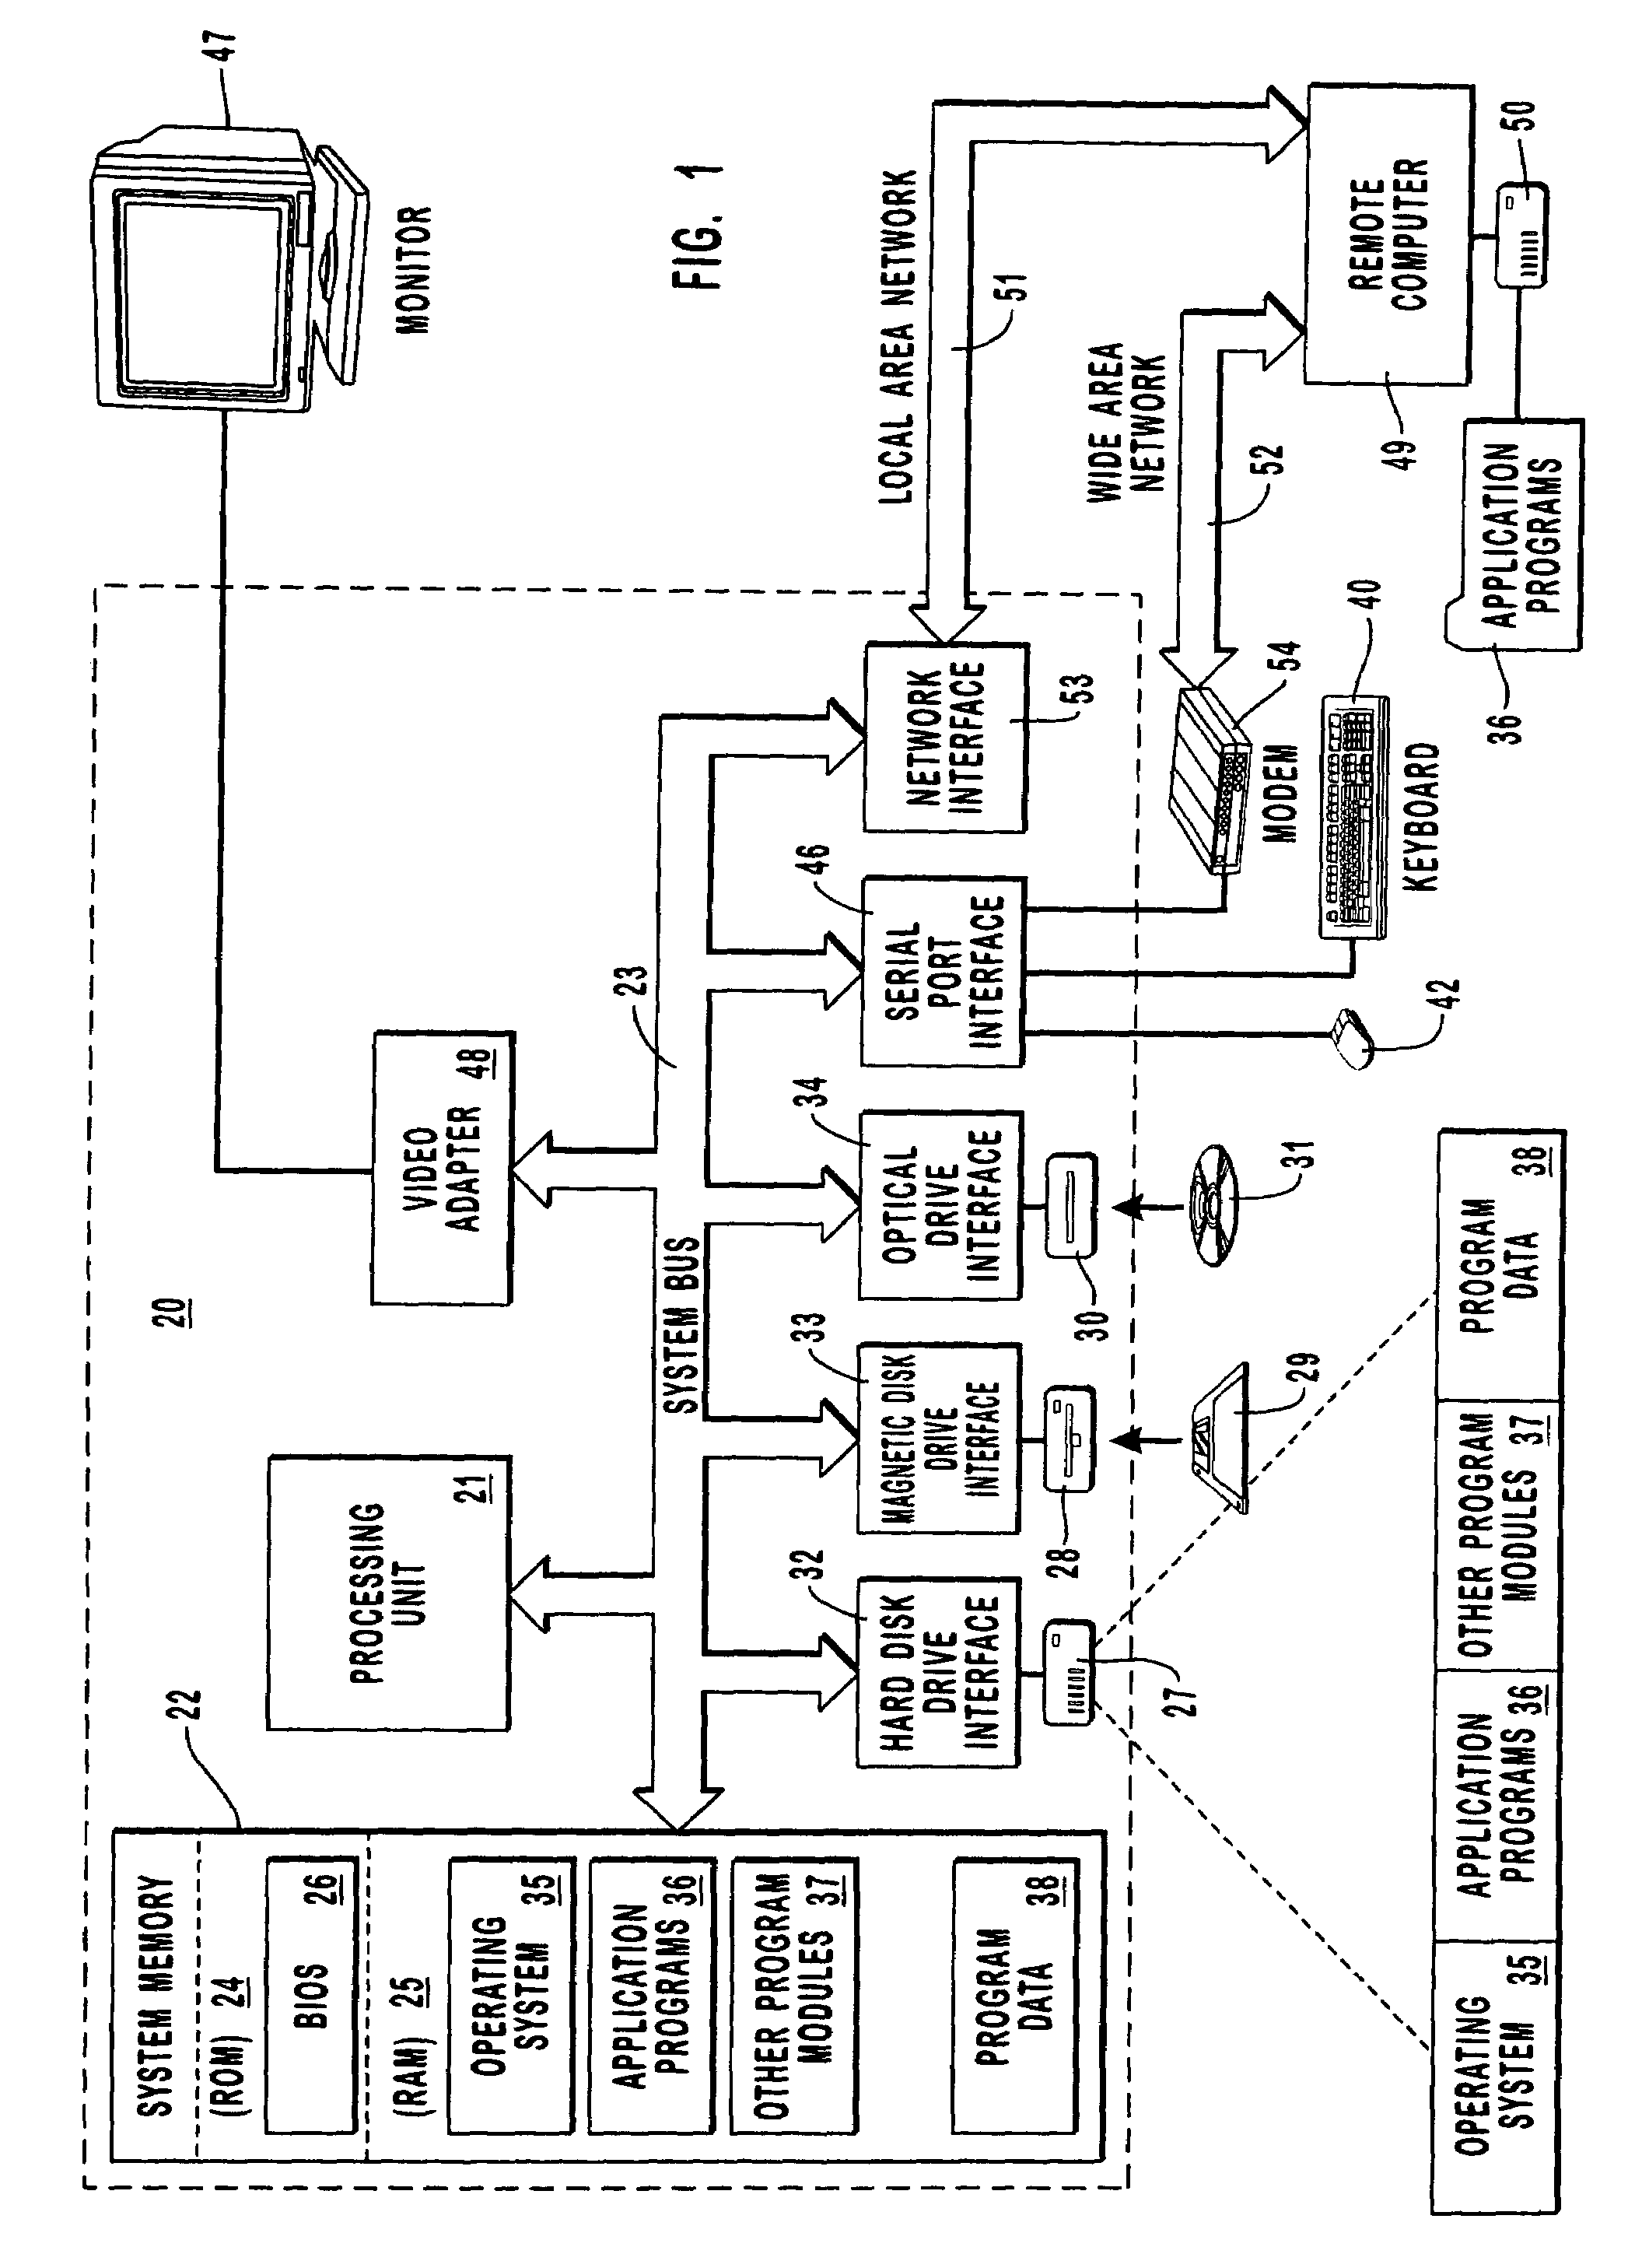 Routing of electronic messages using a routing map and a stateful script engine